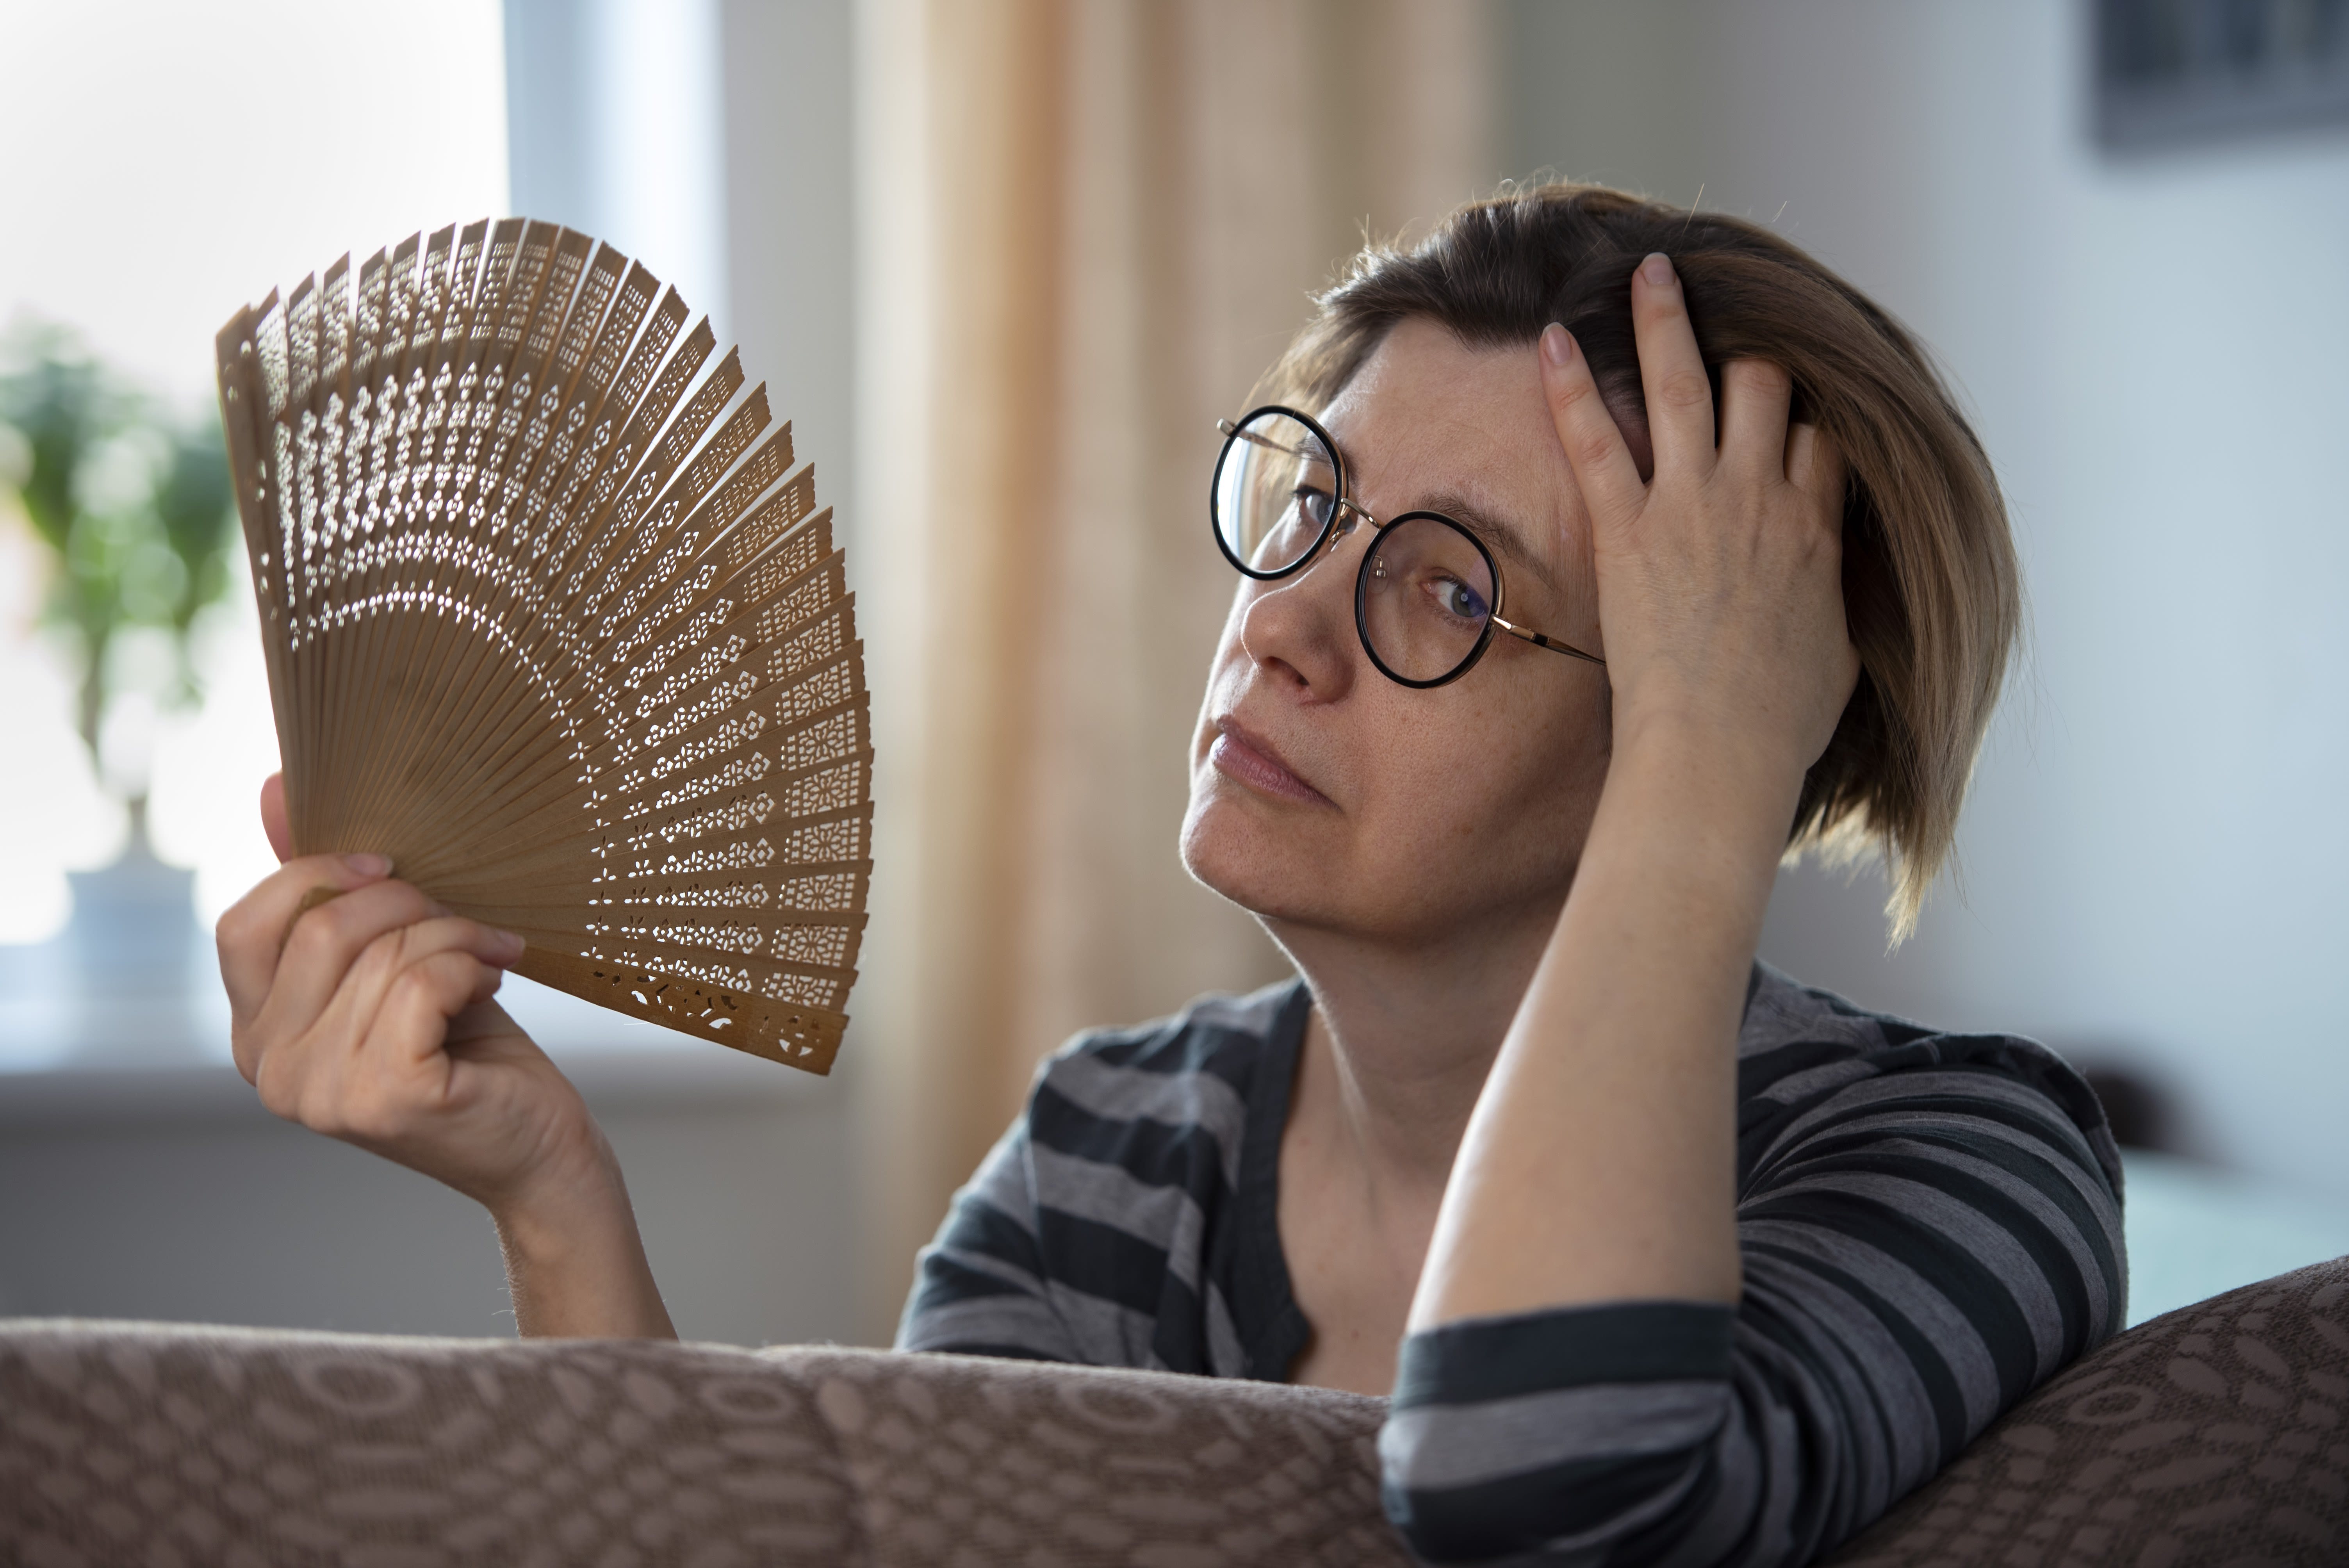 Hot flashes: Here's what's causing them and ways to help prevent them